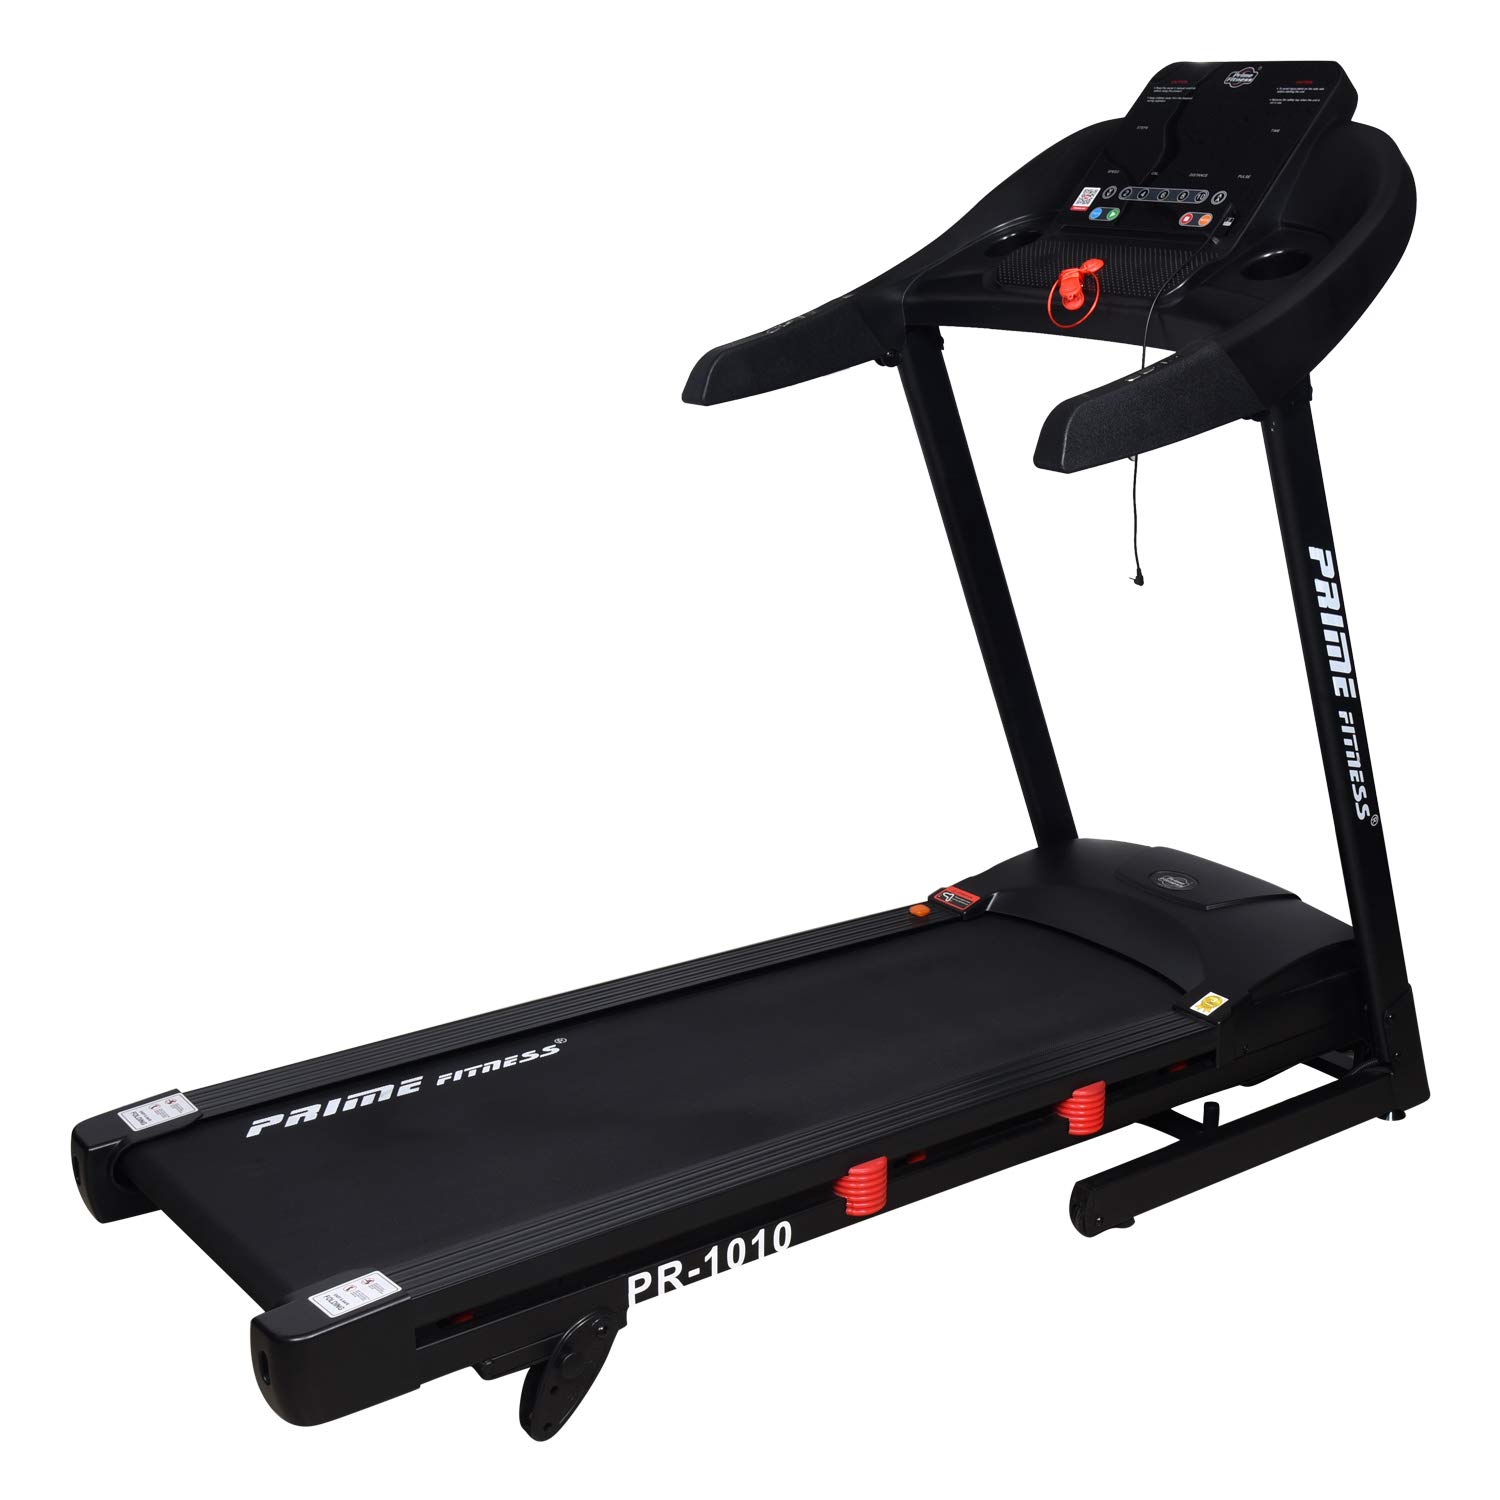 PRIME FITNESS Imported 4 in 1 Manual Treadmill PR 552 with Stepper